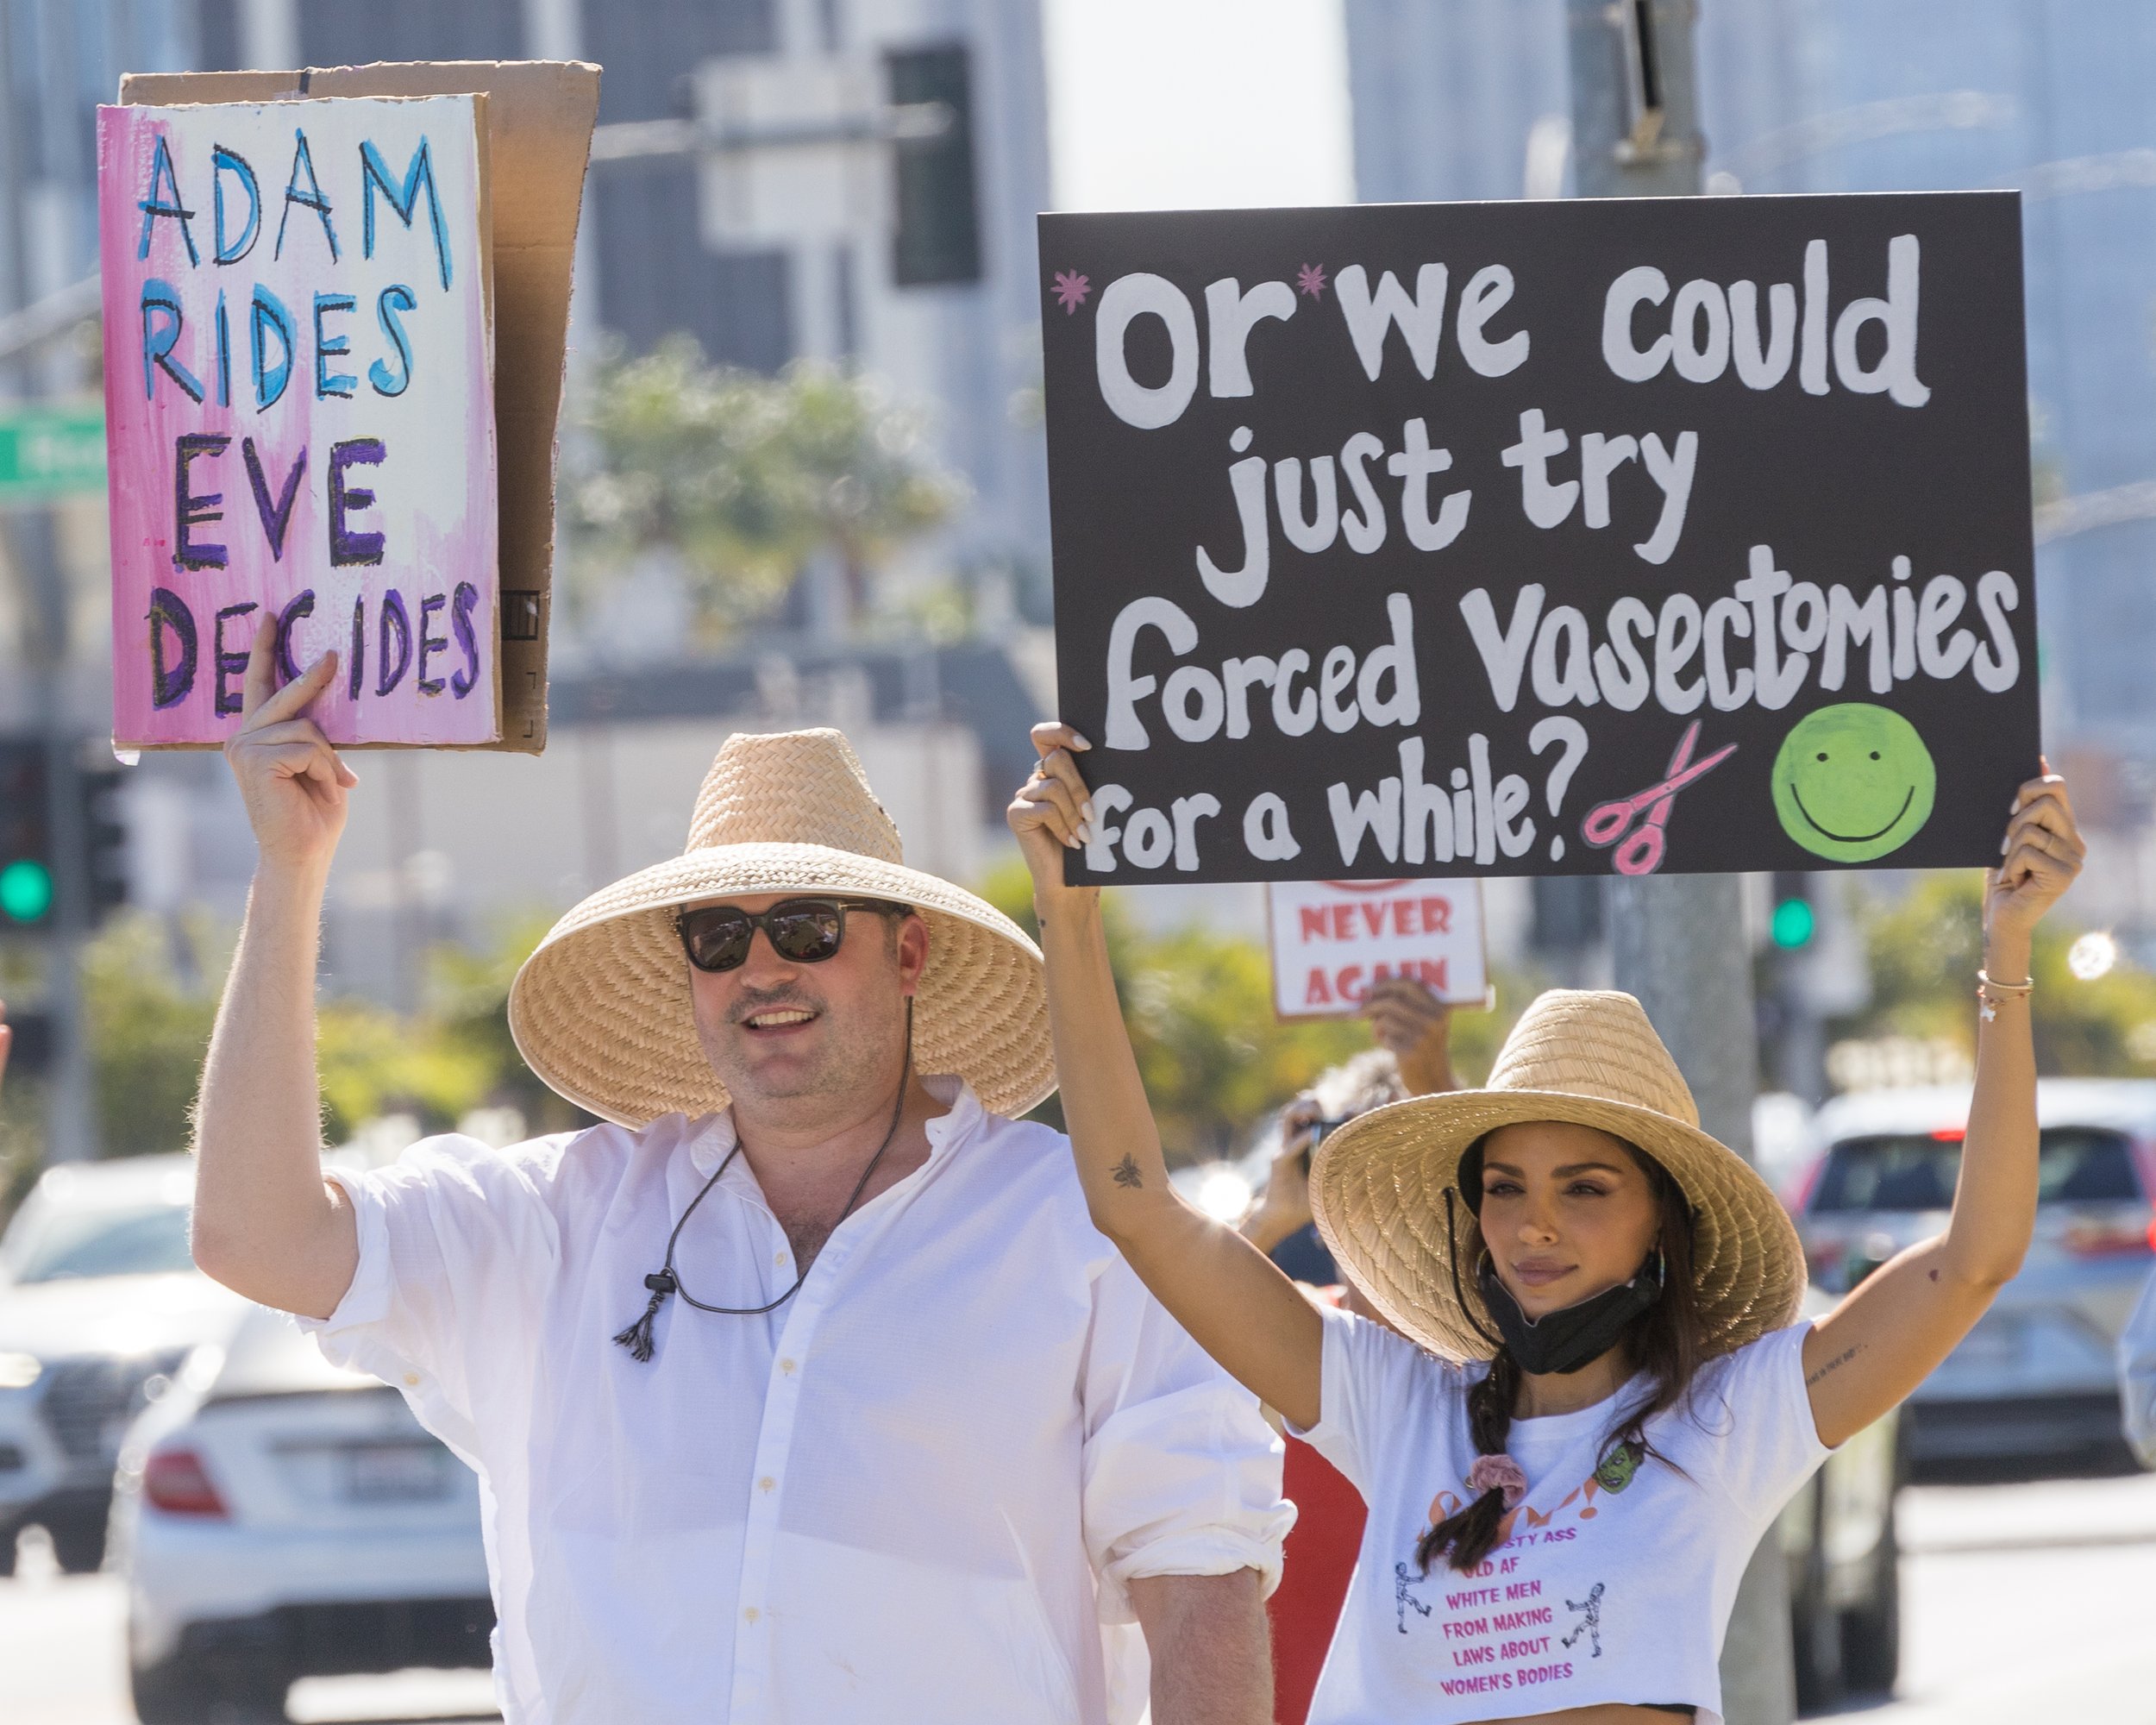  Blake Bachman and Nadia Gray (L-R) at a Womens March event in Beverly Hills, California on Saturday, October, 2 2021.  Abortion rights are a contested issue as states like Texas and Mississippi push laws that restrict womens access to safe, legal, a